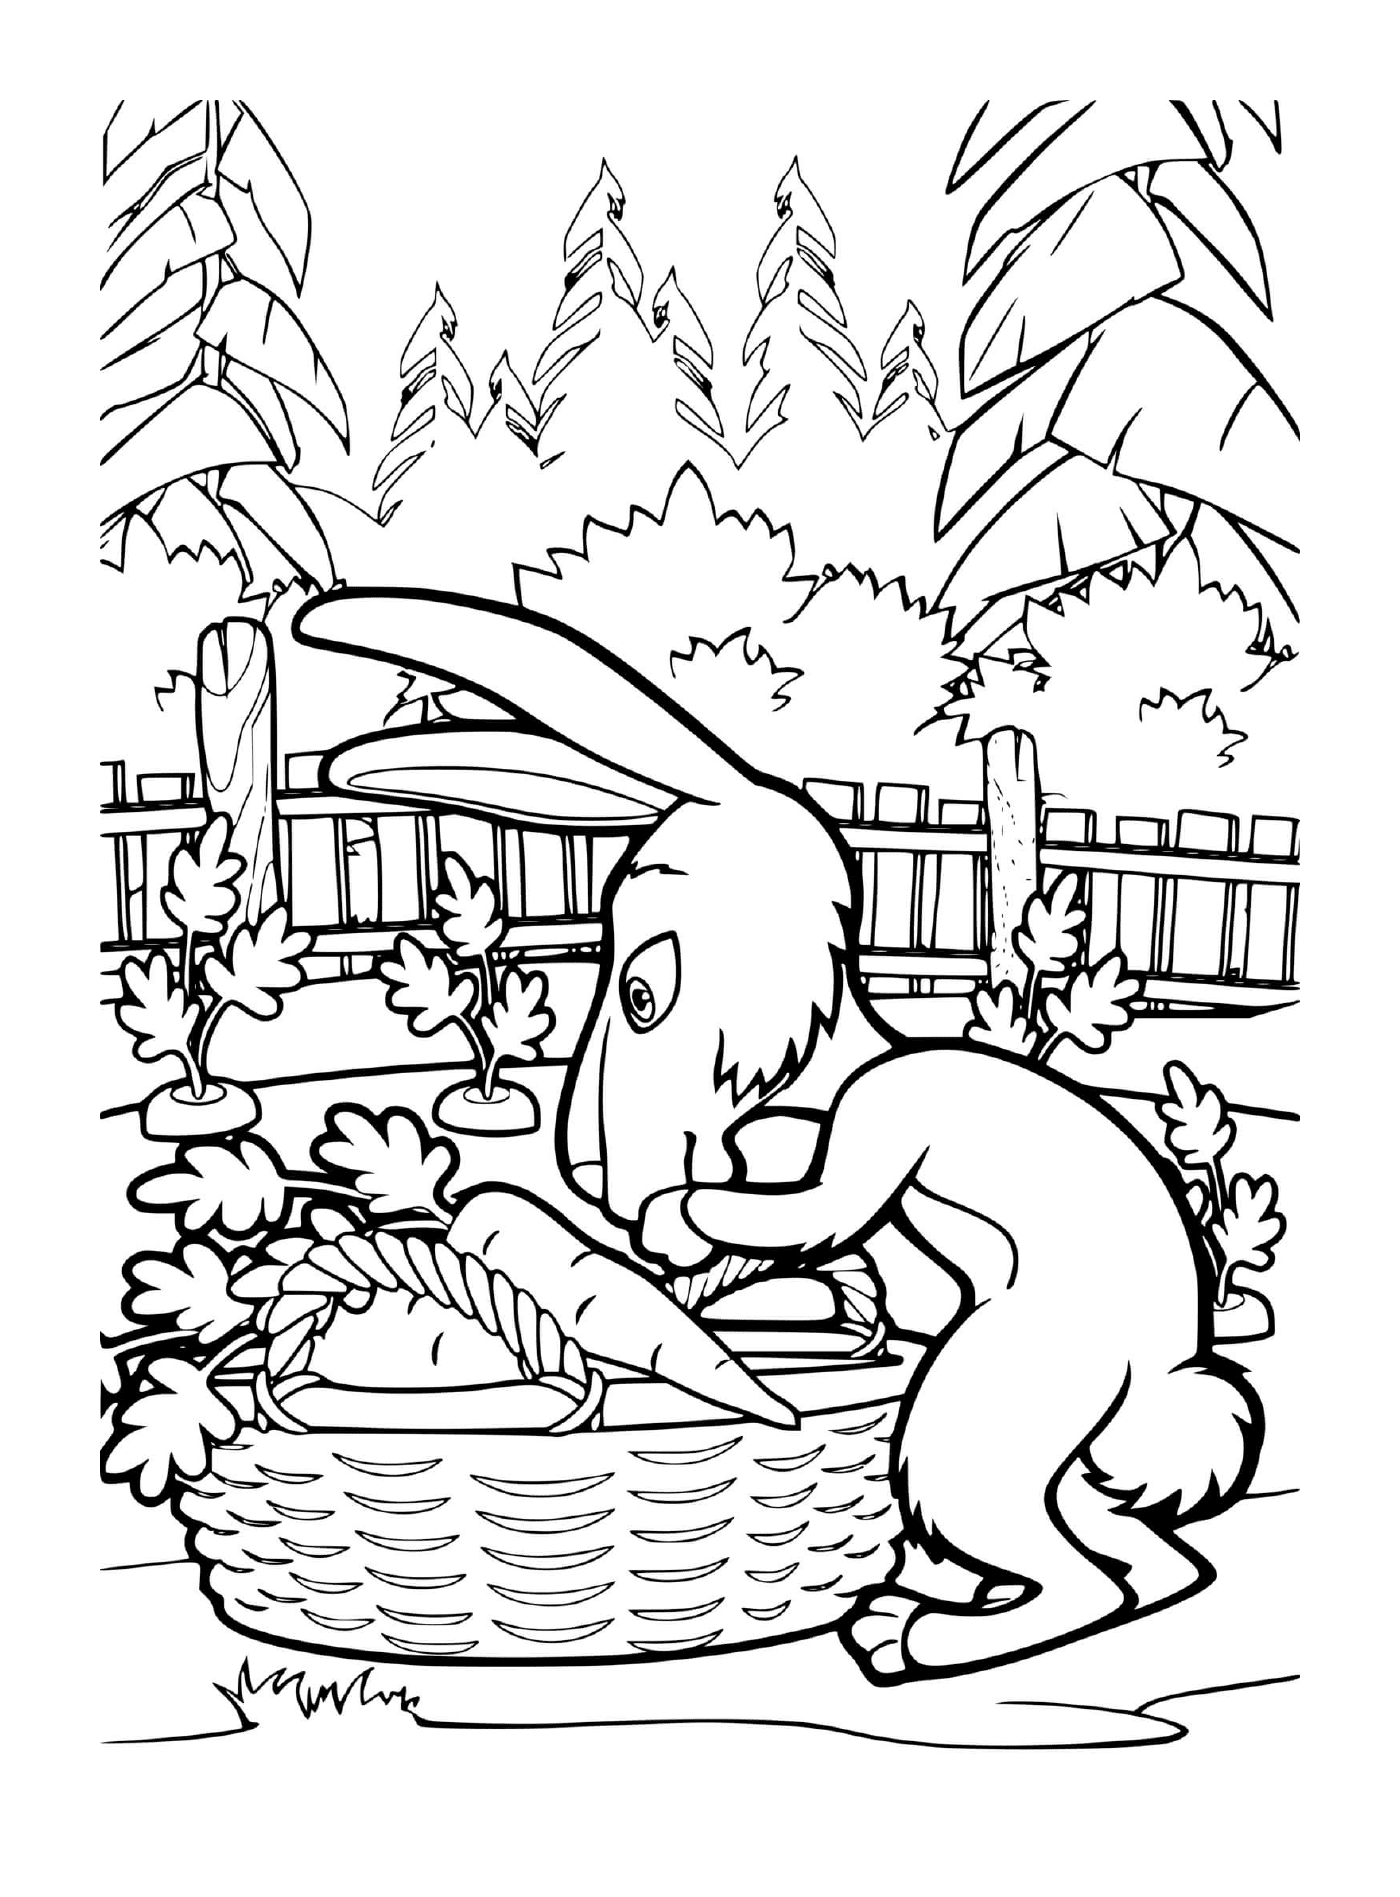  The hare flies carrots 